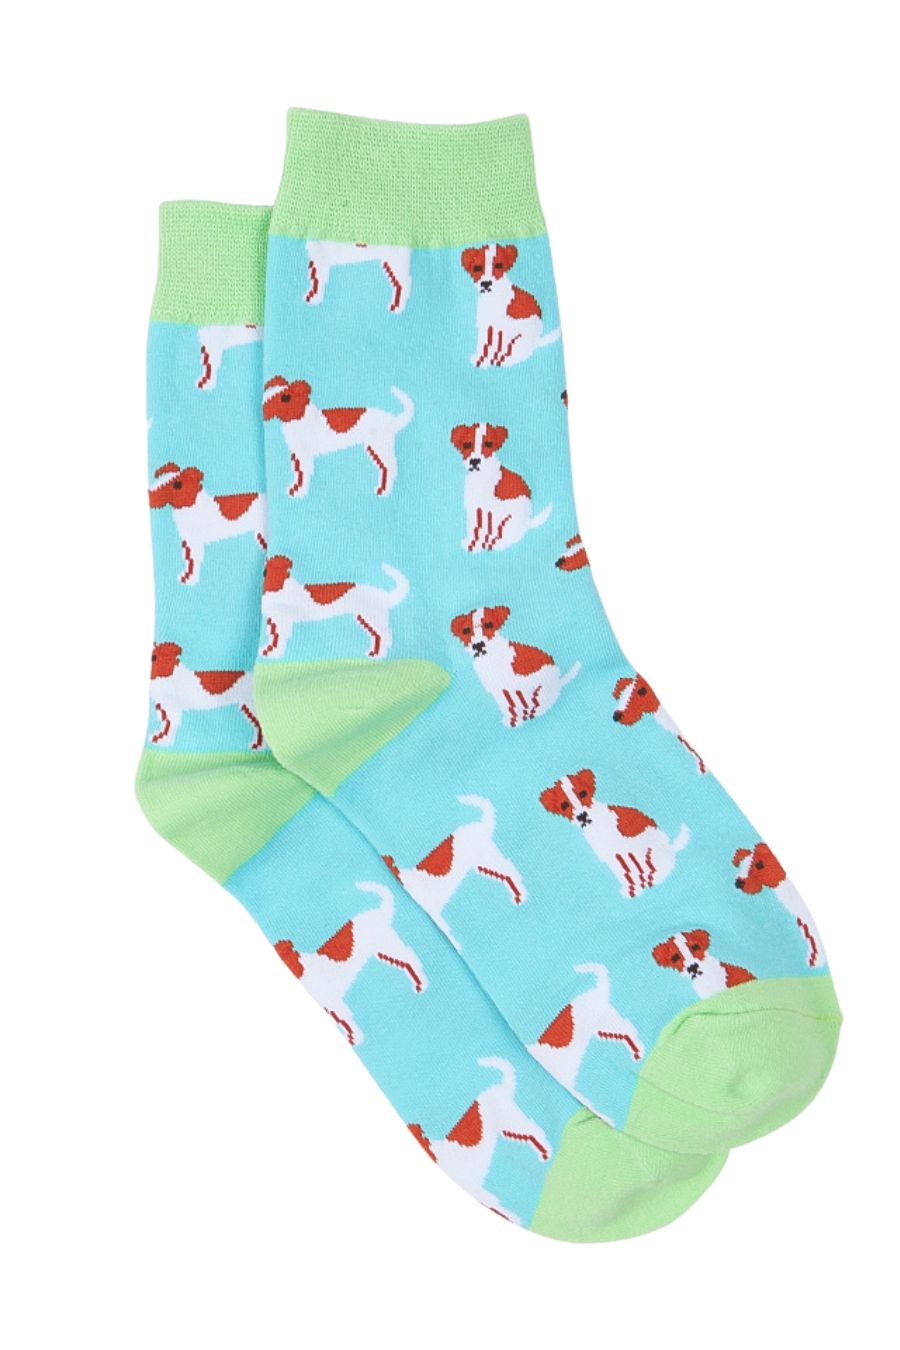 blue and green dress socks with jack russell dogs all over